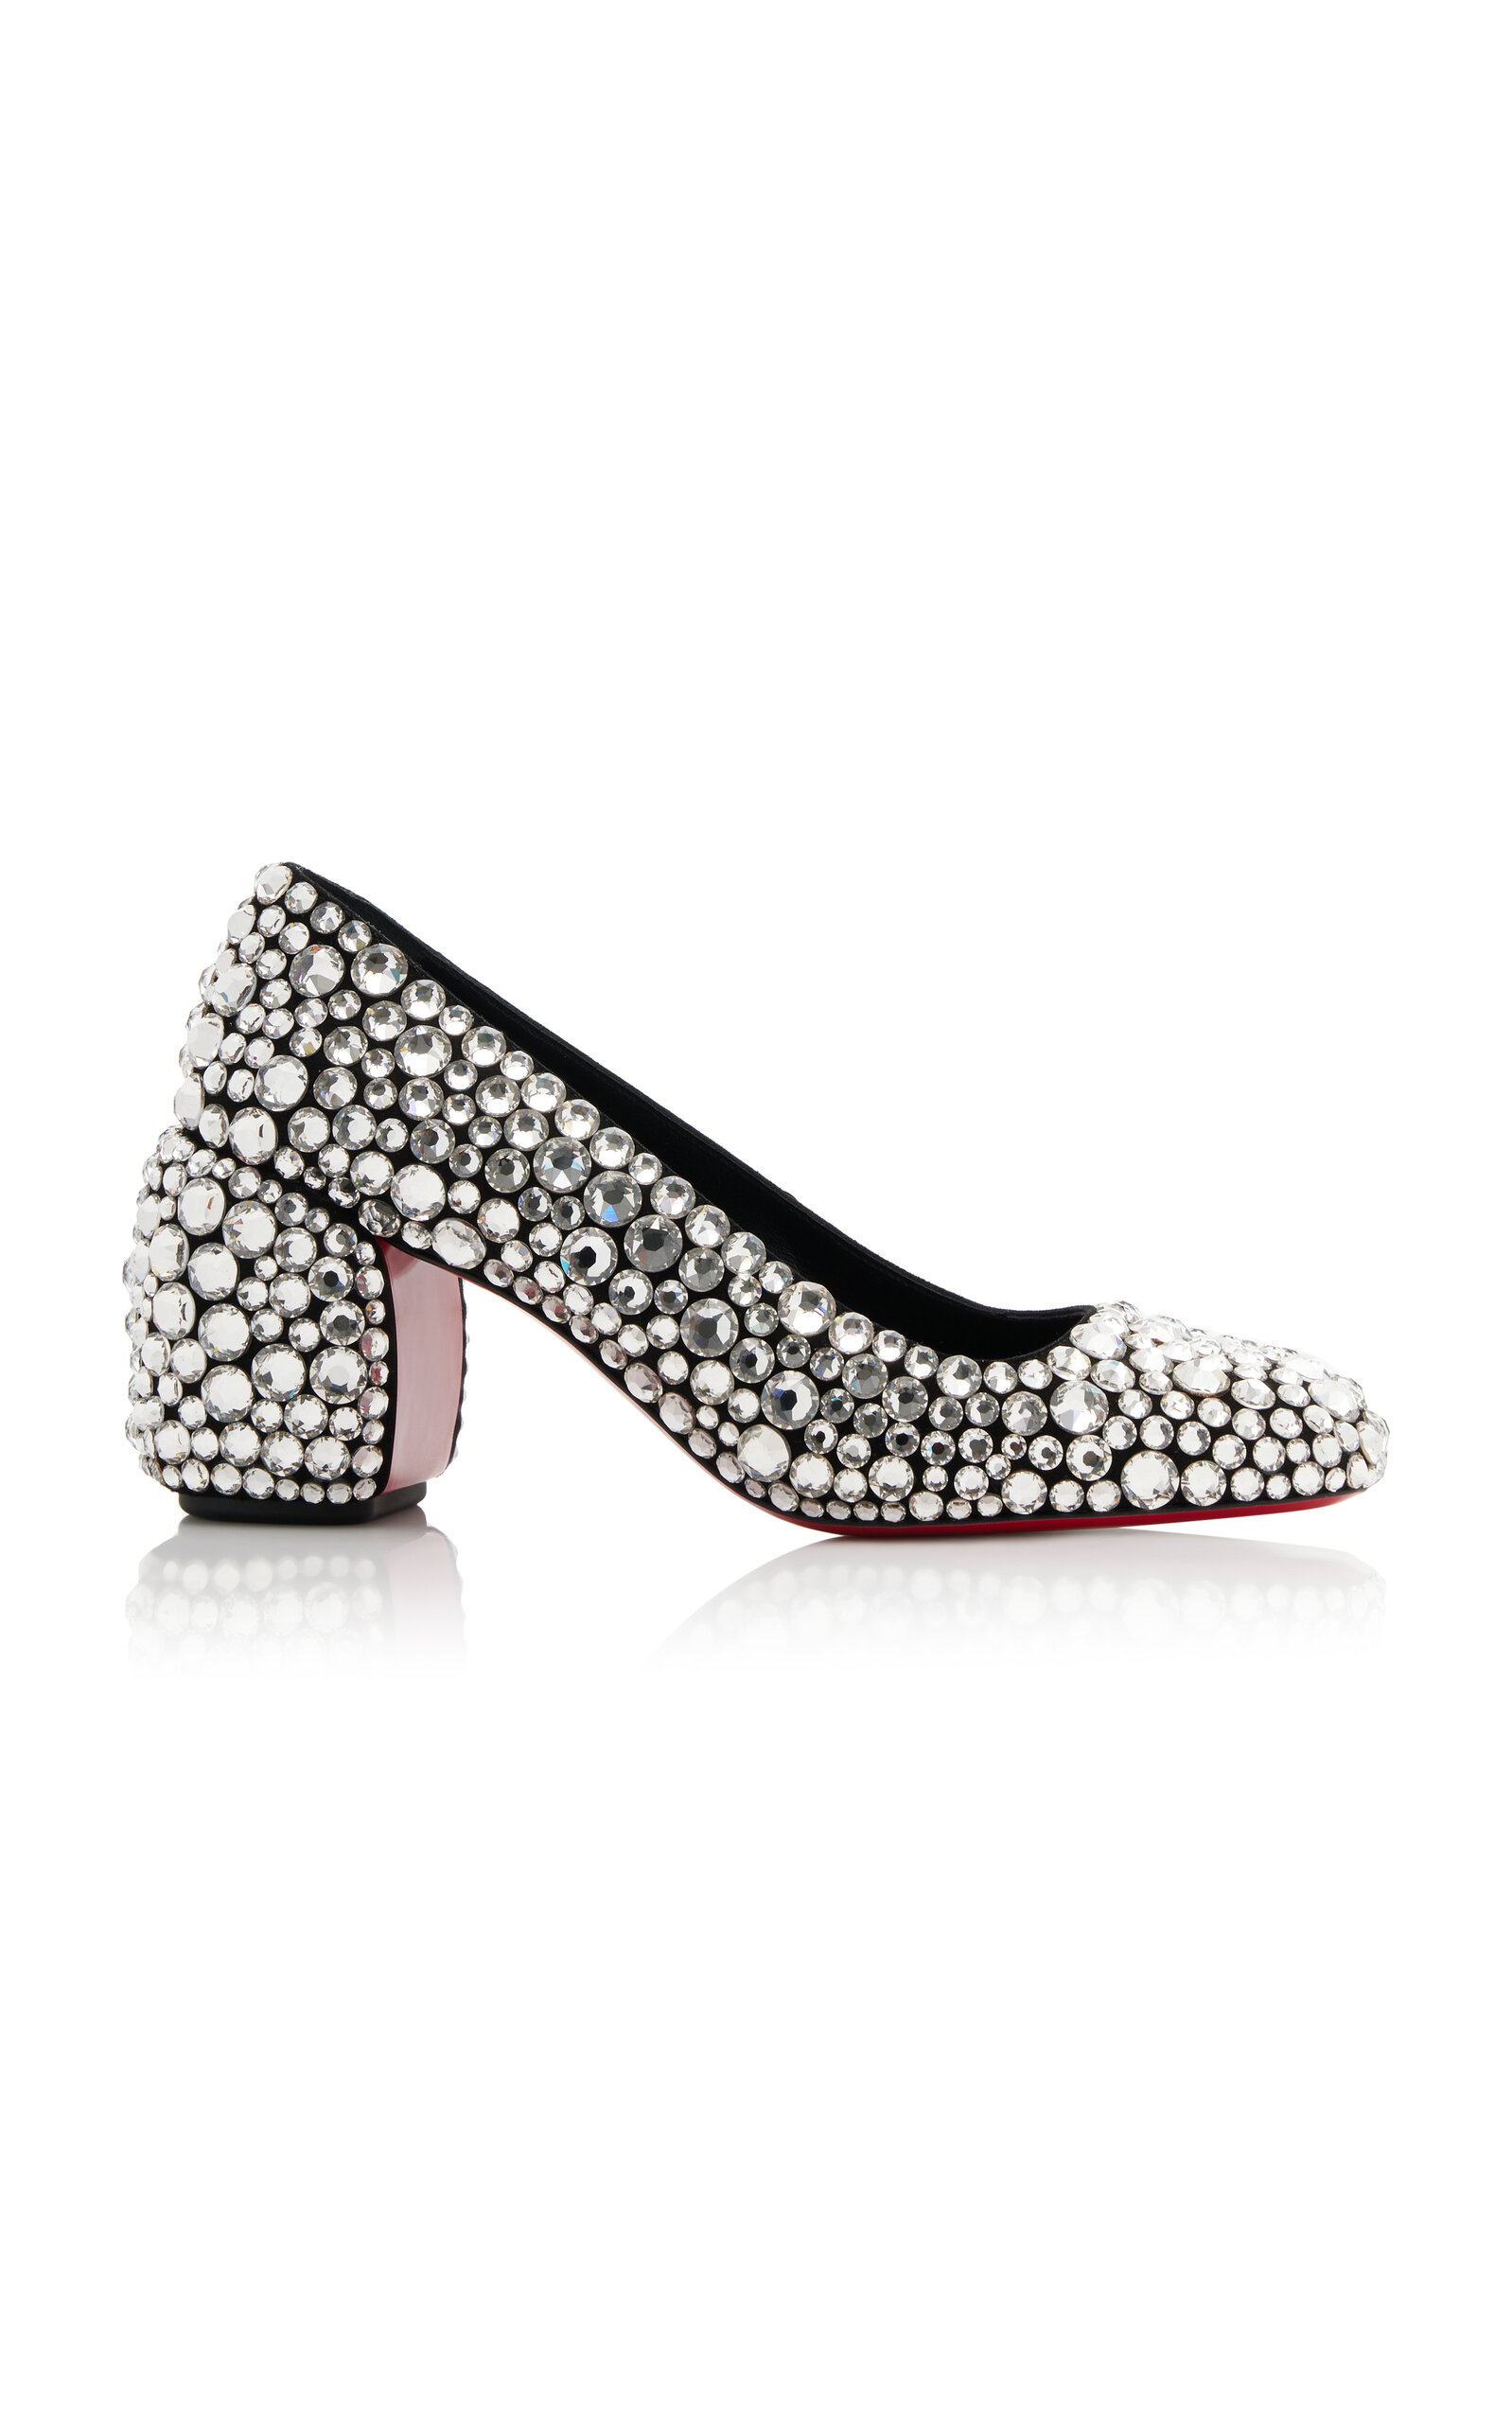 Minny Maxi 70mm Crystal-Embellished Suede Pumps